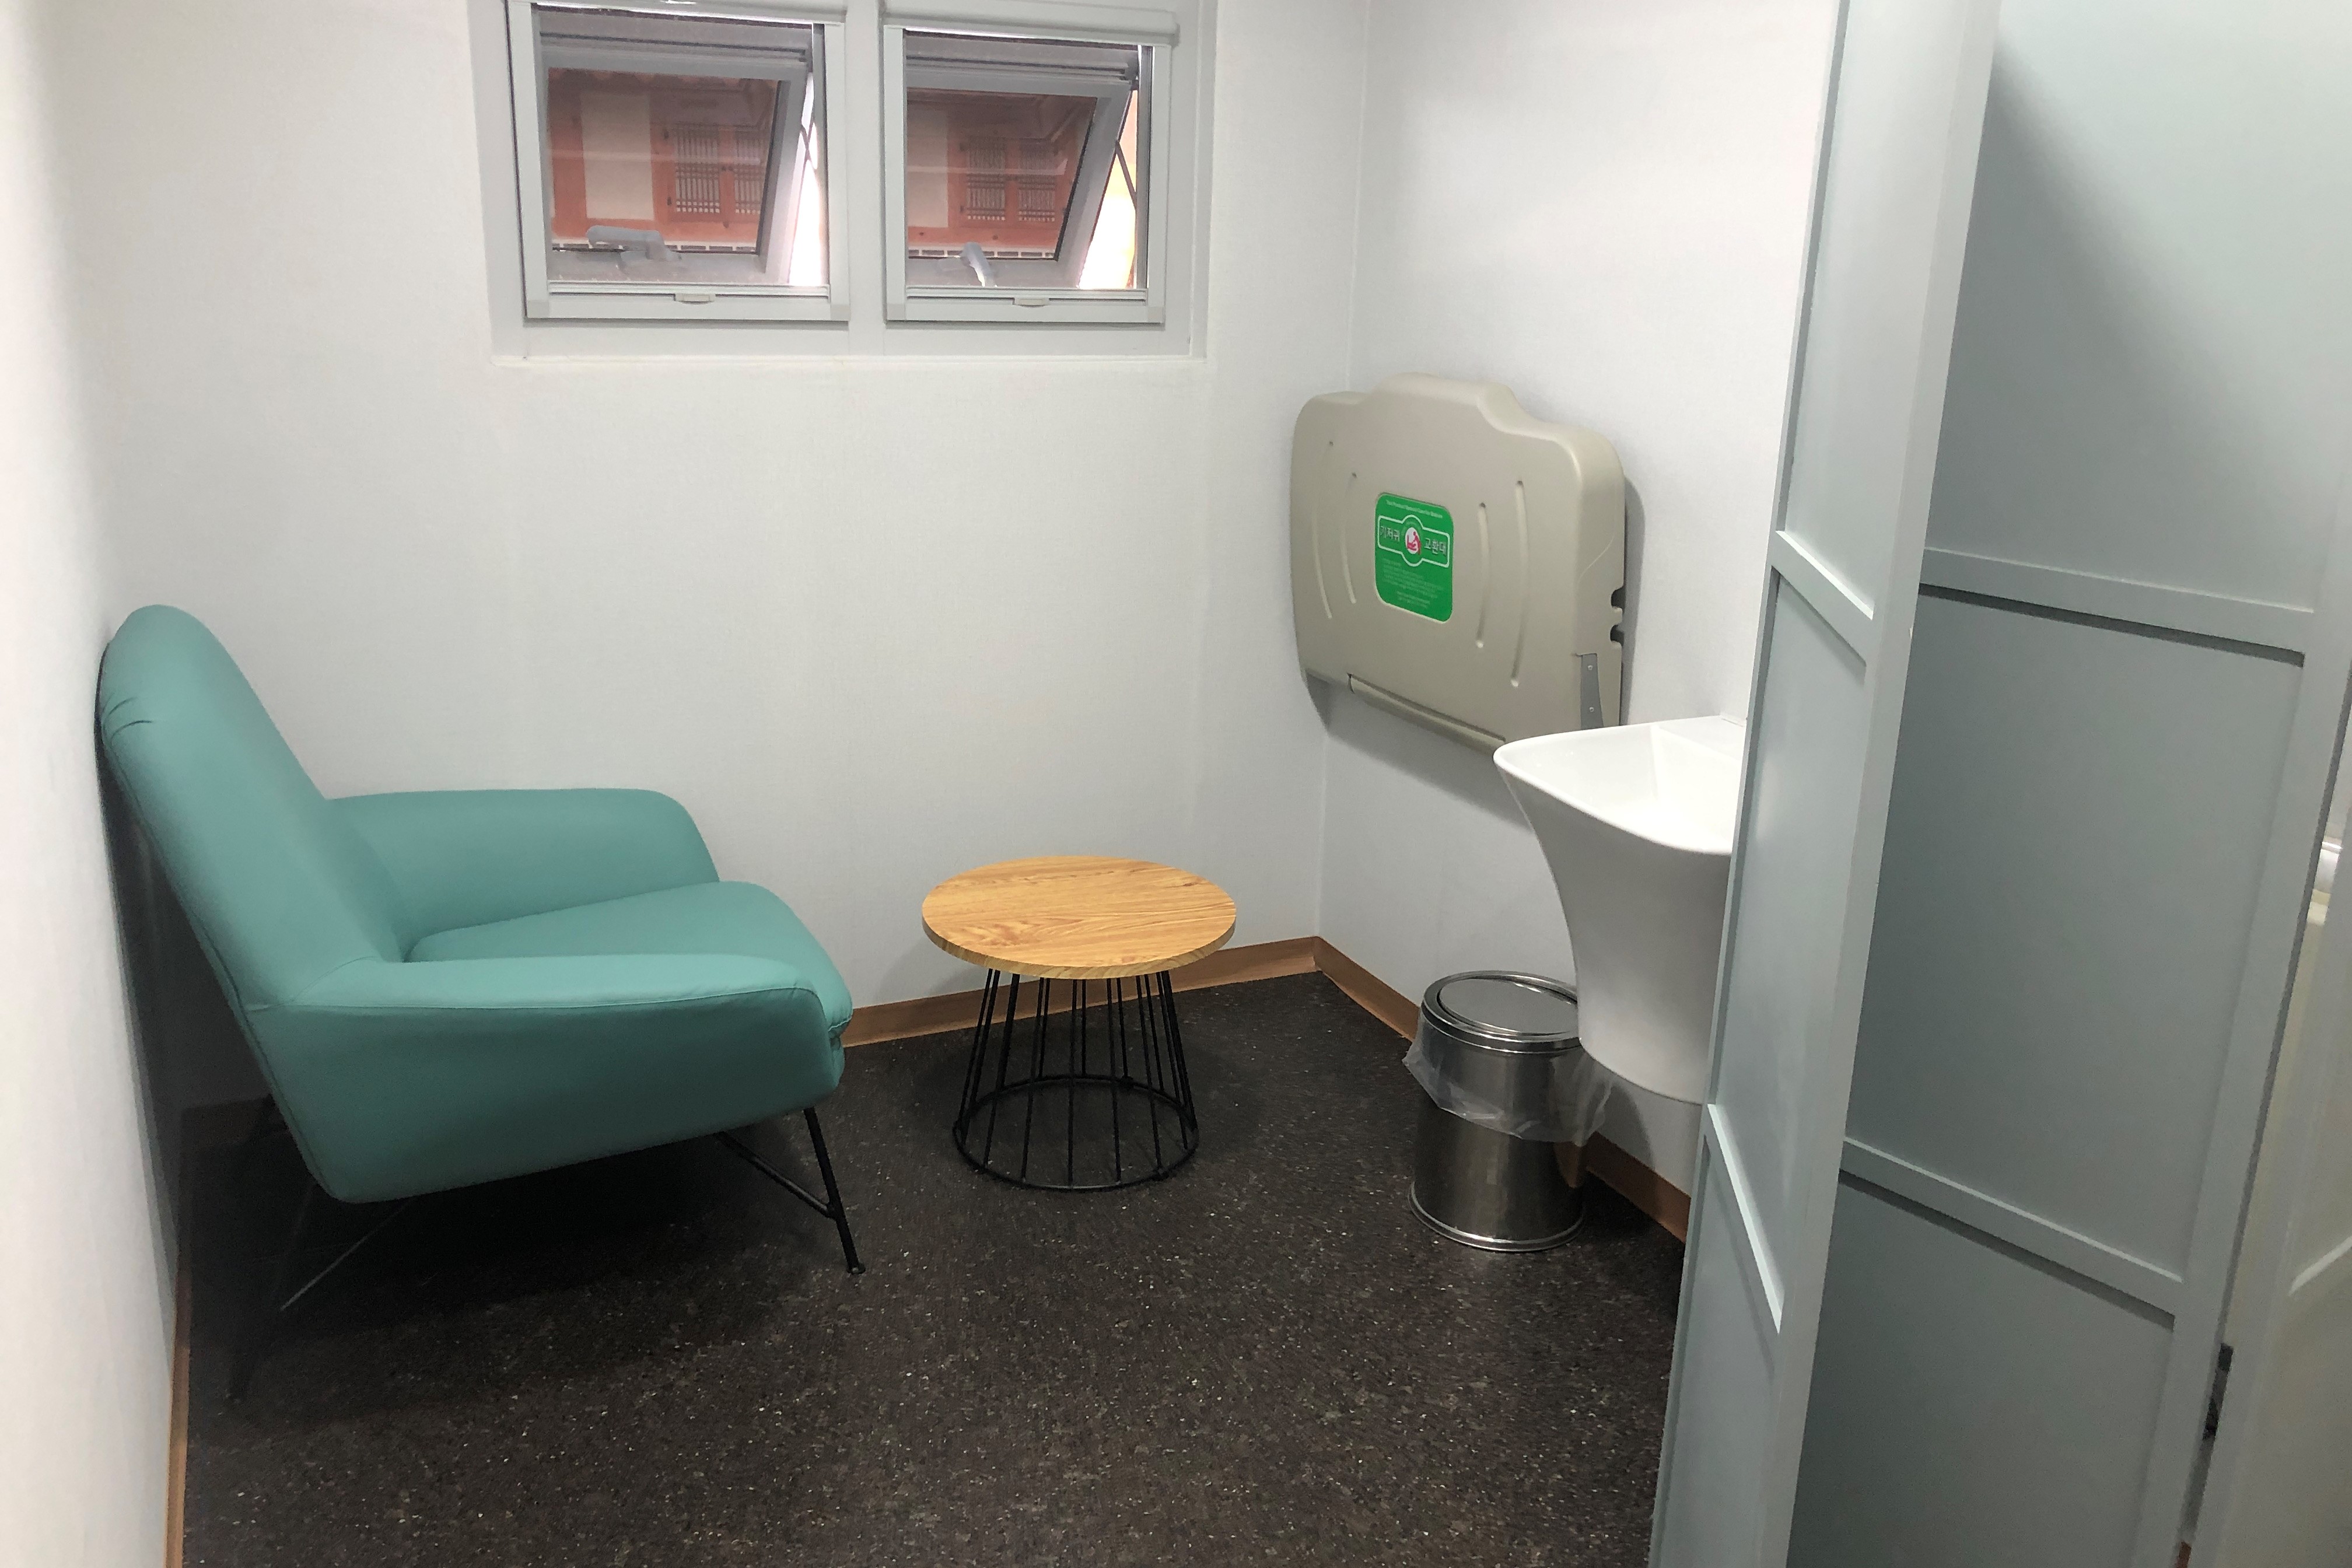 Expecting mothers and children resting area 0 : Nursing room with a single sofa and a diaper changing station seen through foldable door
